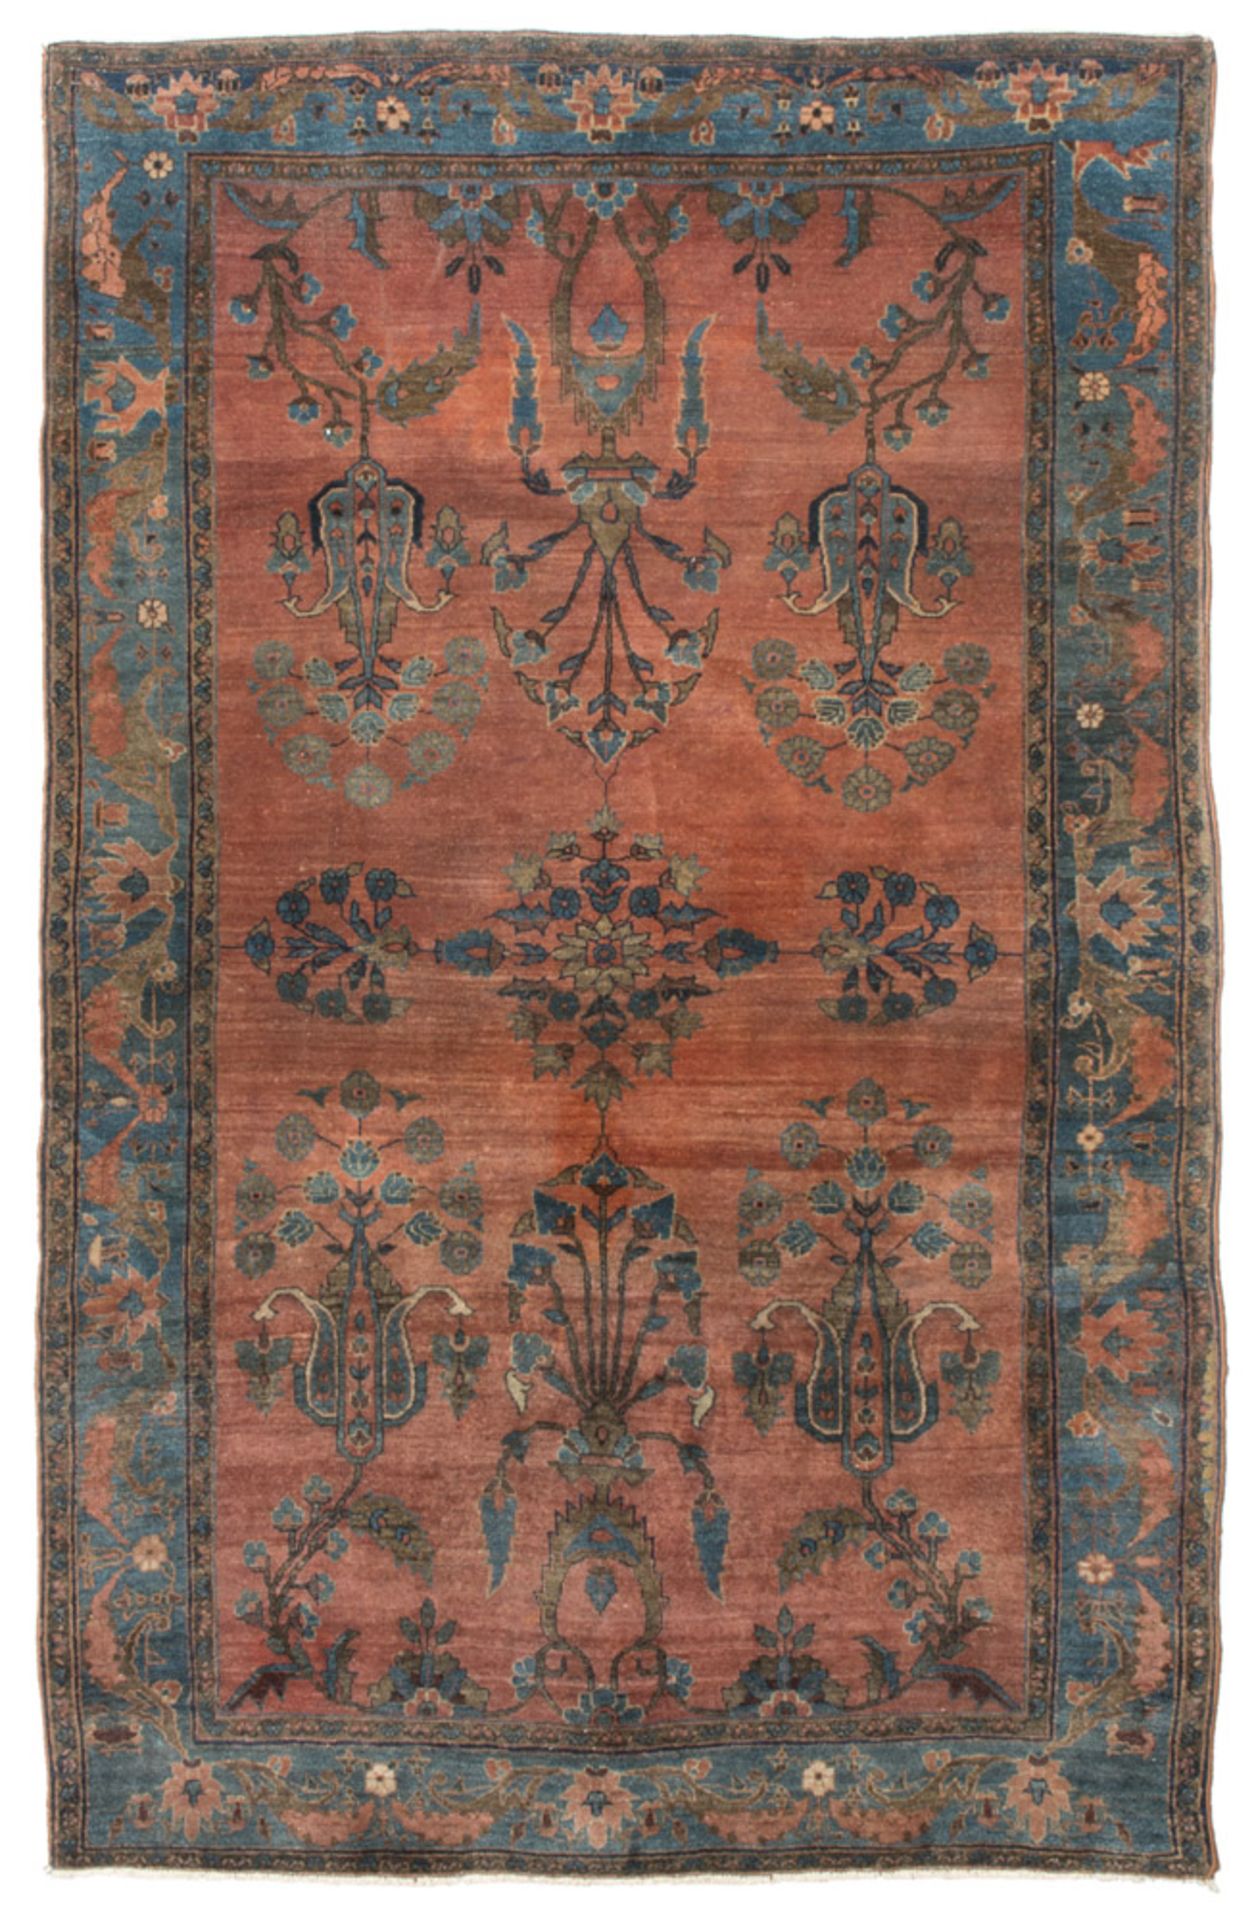 SARUK CARPET, EARLY 20TH CENTURY with design and trellis with boteh, in the central field with red